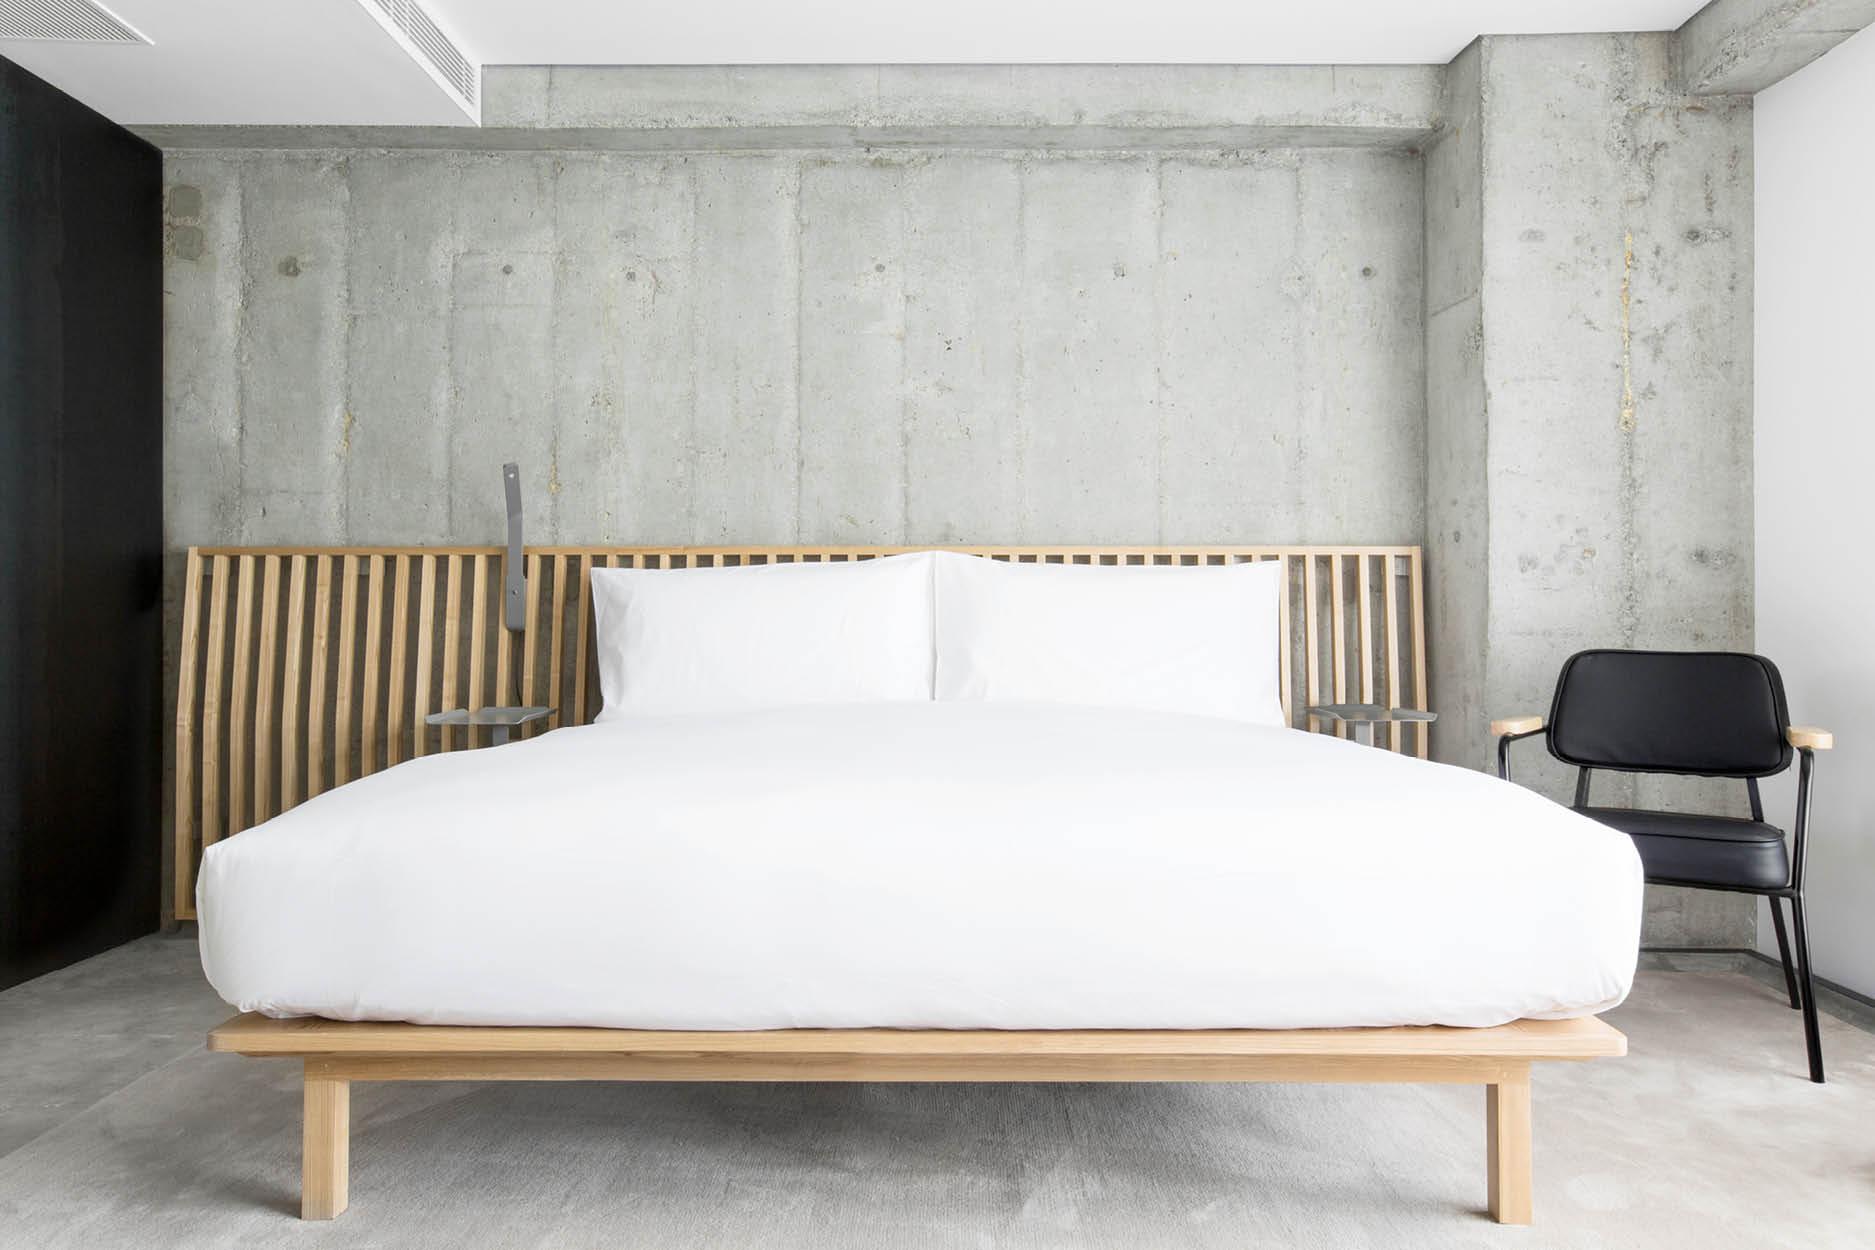 Neighbourhood By Design: Exploring the Beguiling TUVE Hotel